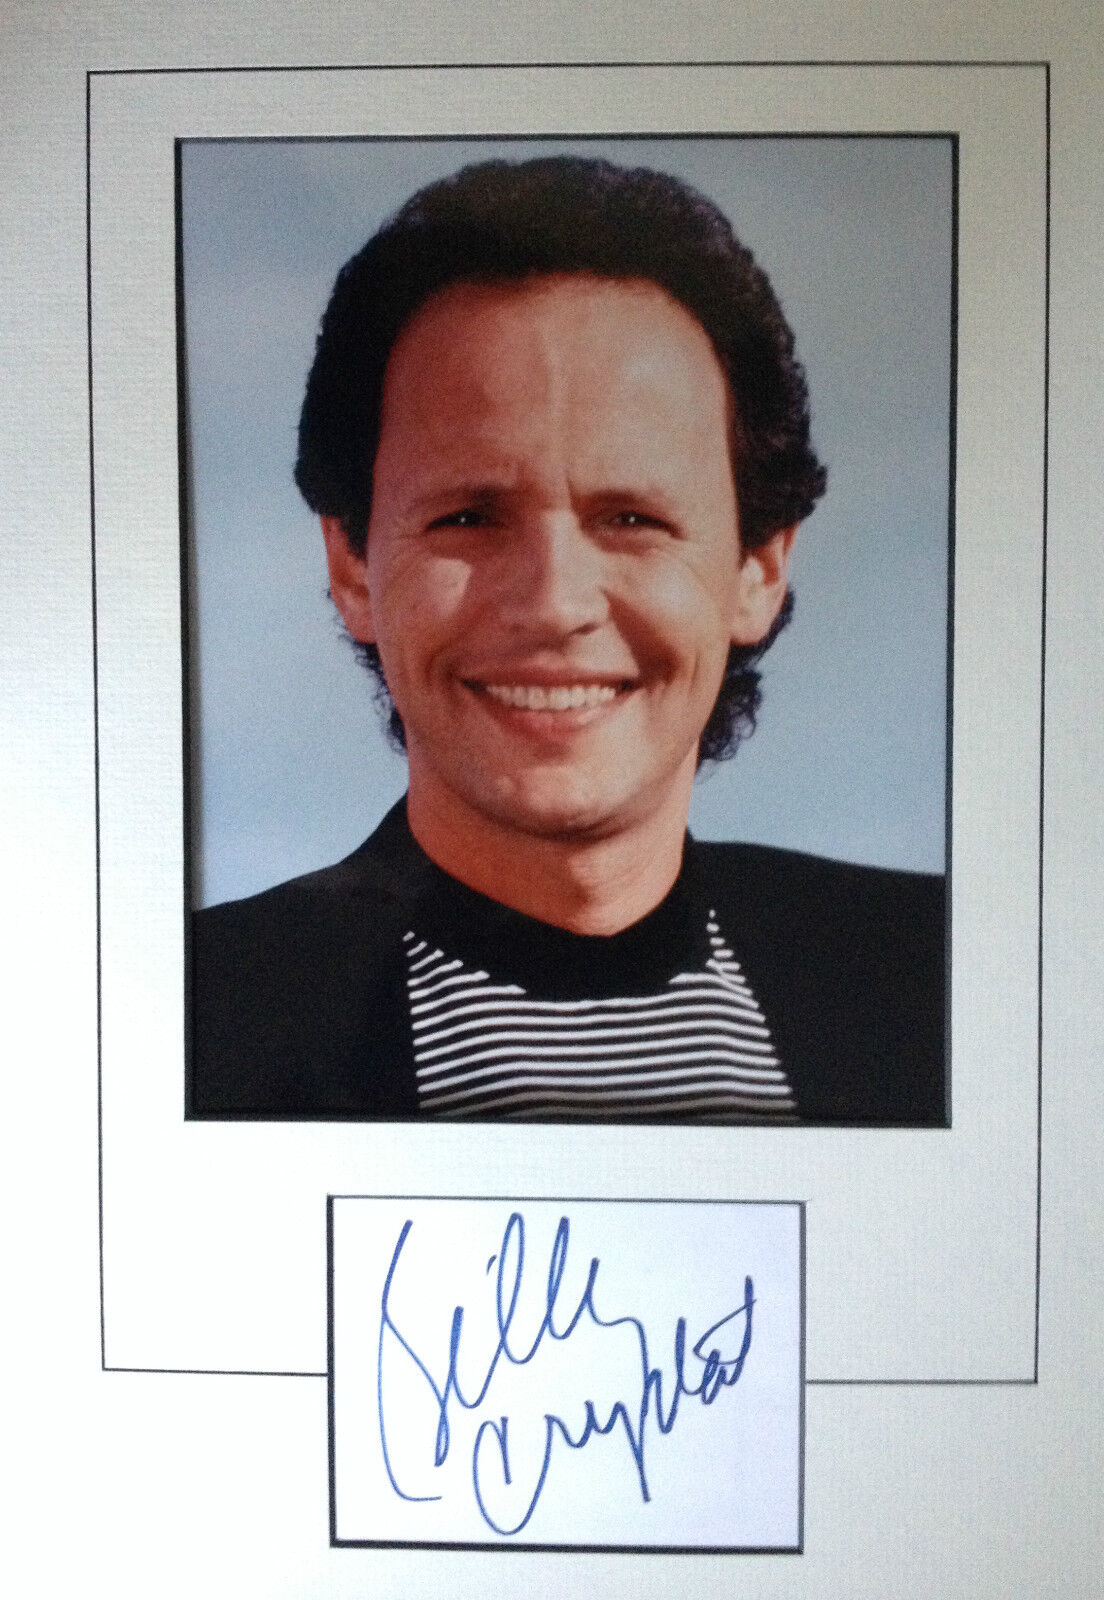 BILLY CRYSTAL - TOP ACTOR - BRILLIANT SIGNED COLOUR Photo Poster painting DISPLAY